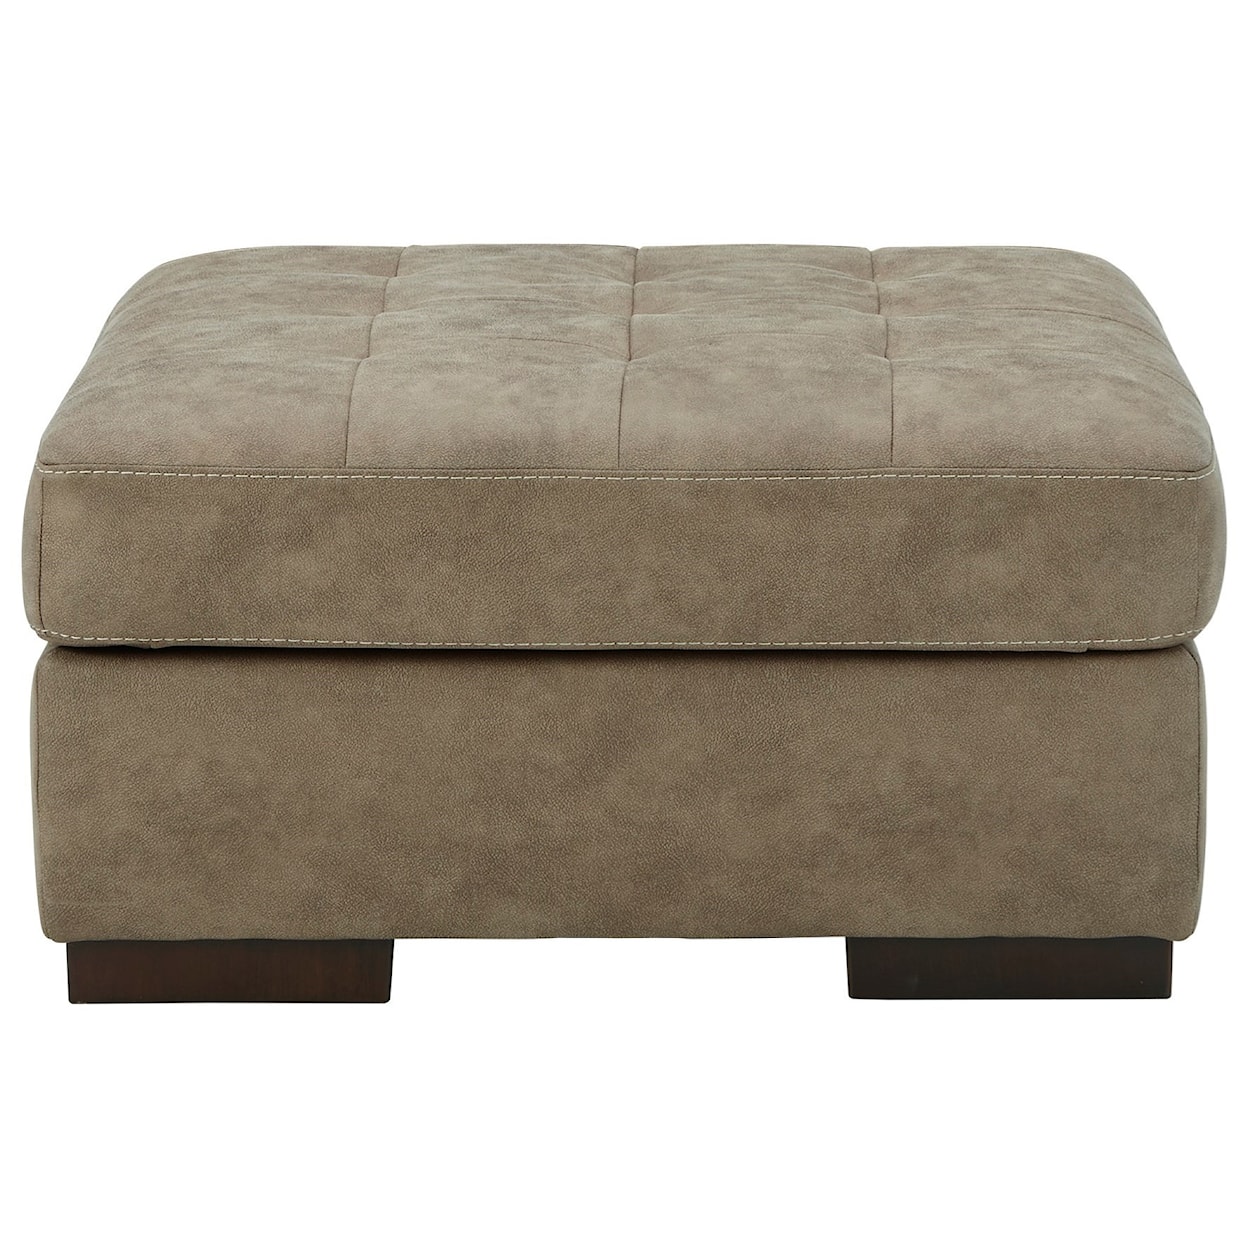 Signature Design by Ashley Furniture Maderla Oversized Accent Ottoman